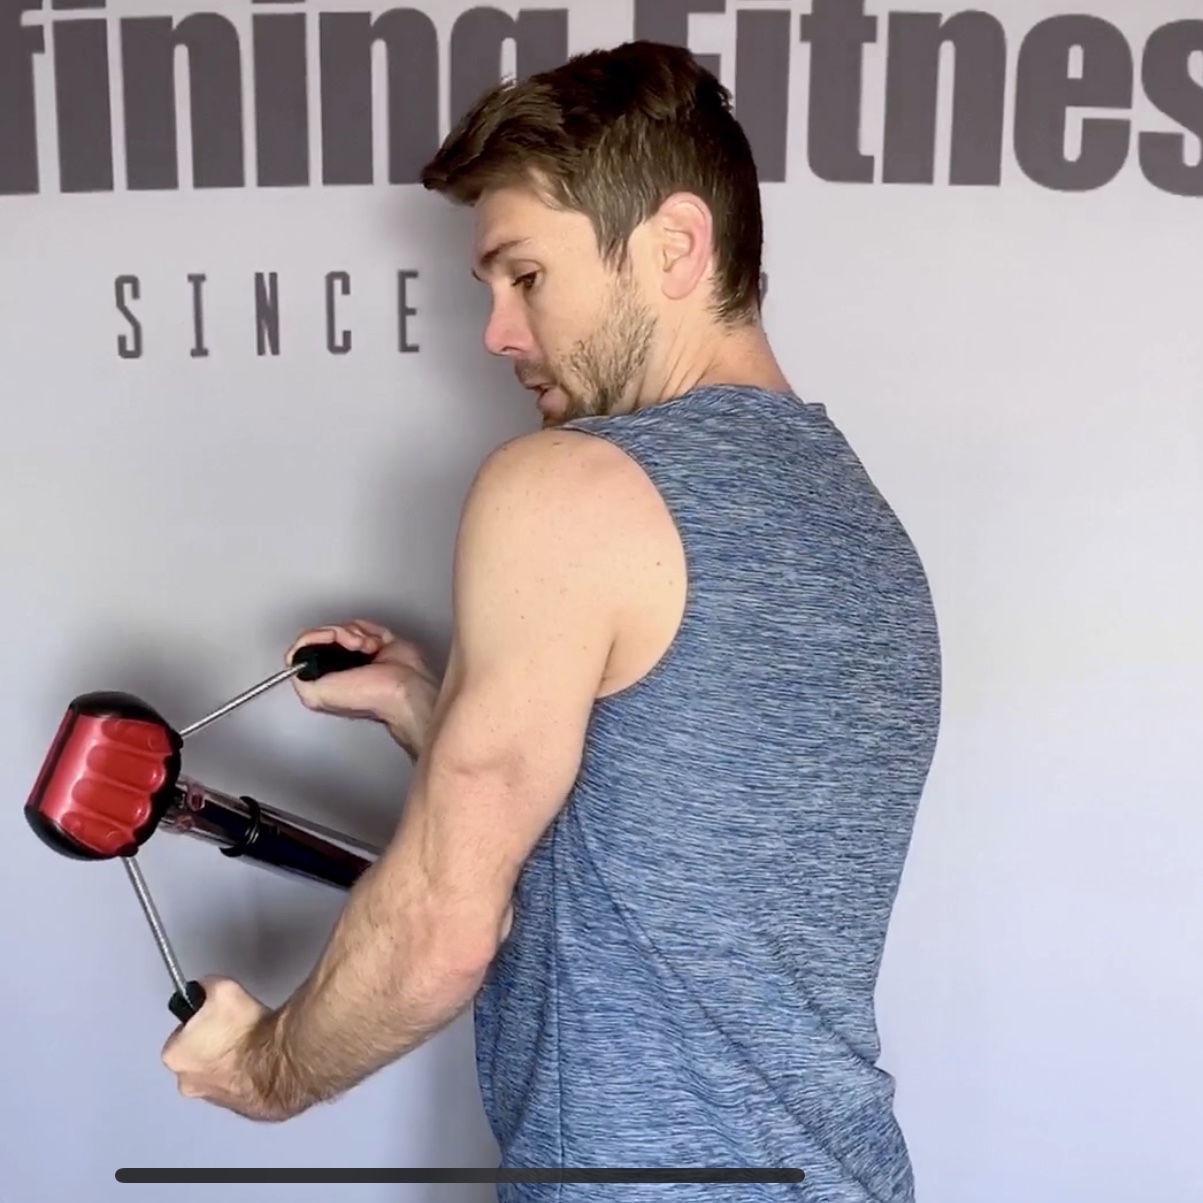 Tricep Exercises for Bigger Arms - Bullworker Personal Home Fitness